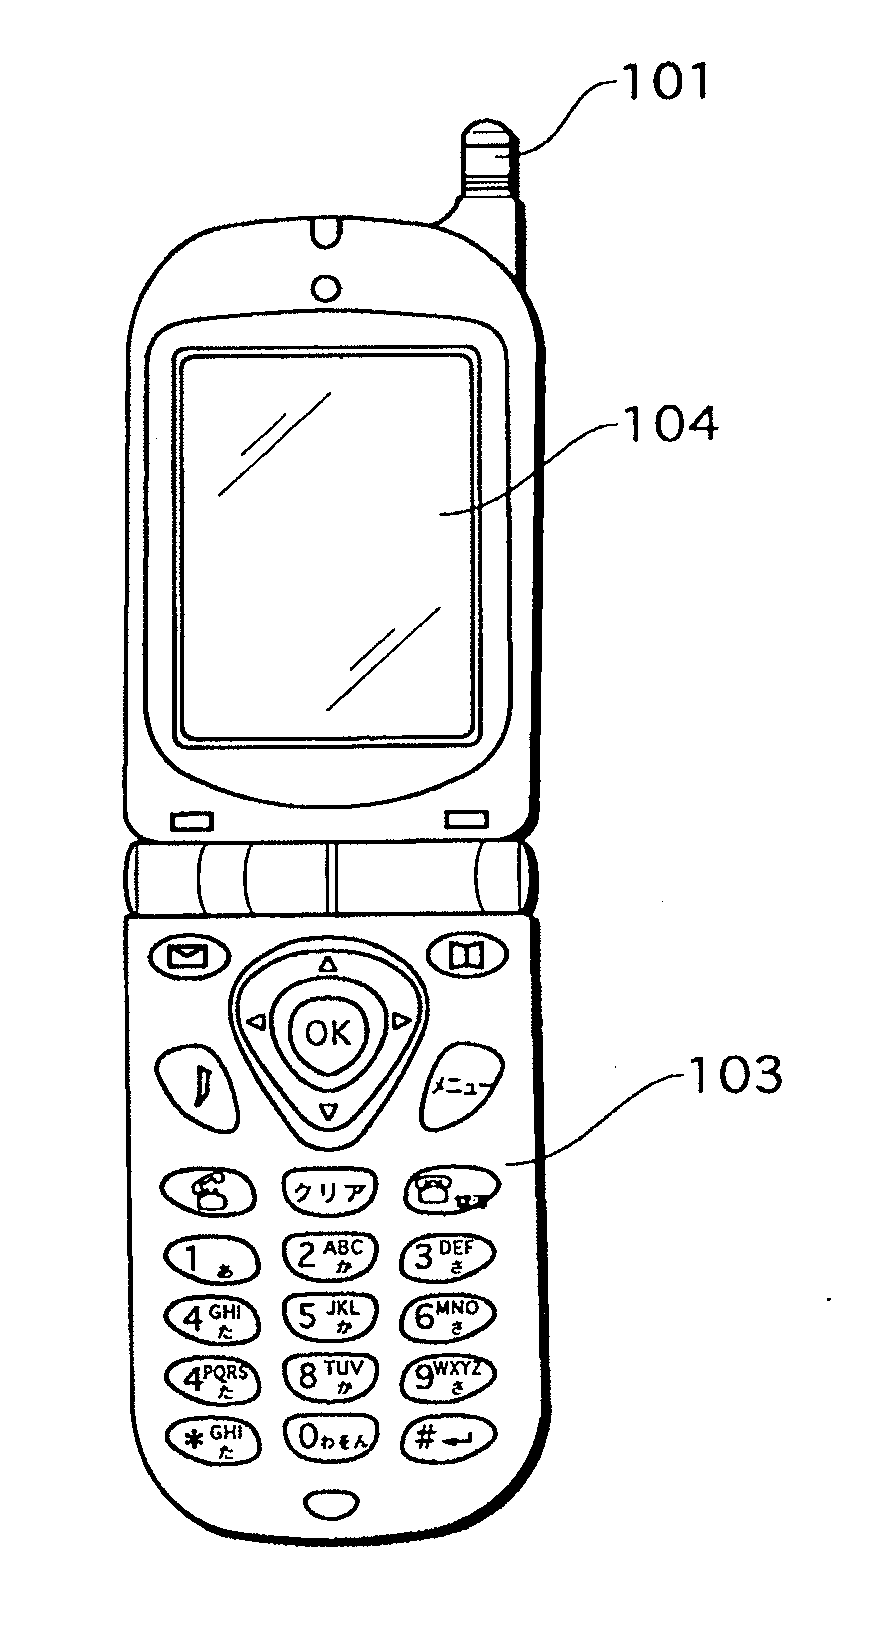 Cellular phone provided with key lock function